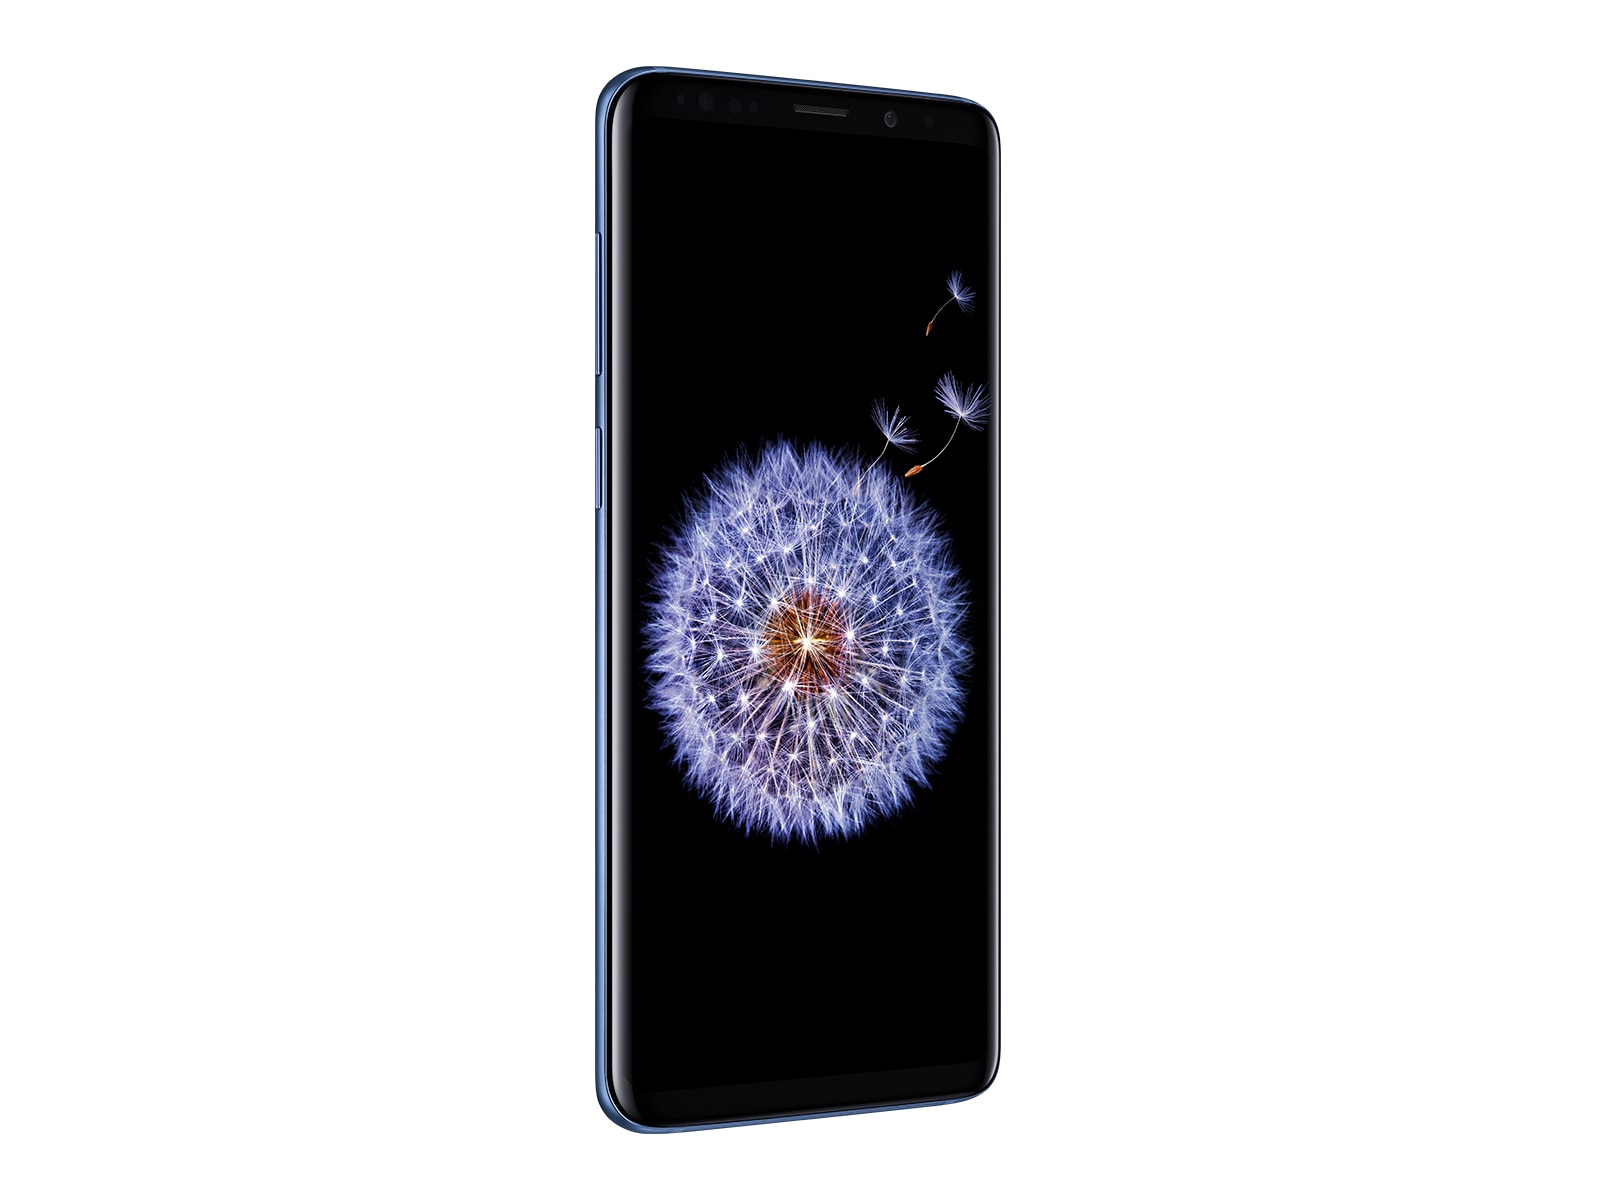 Thumbnail image of Galaxy S9+ 64GB (US Cellular)